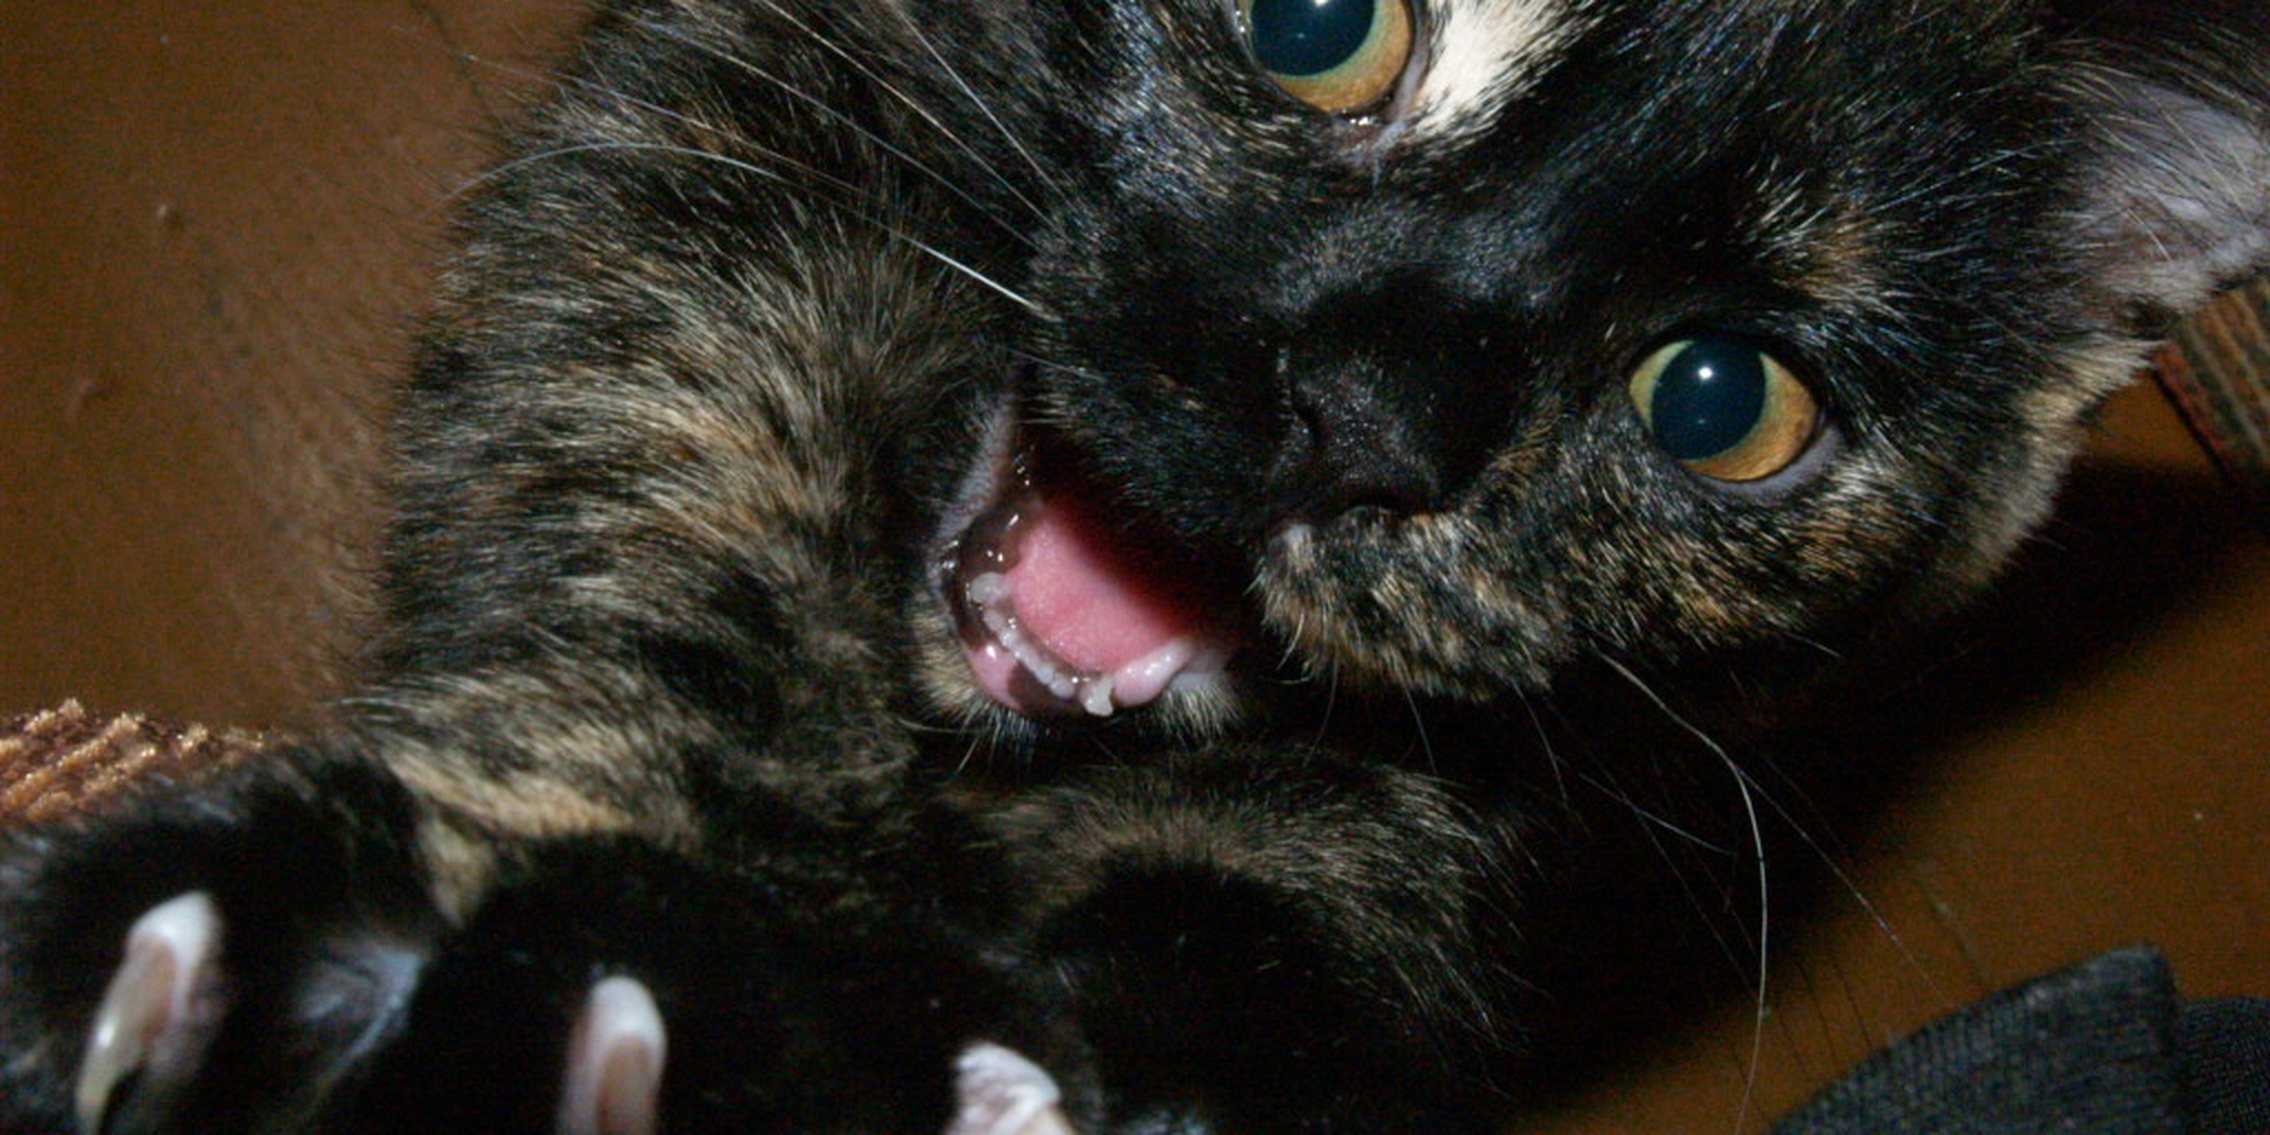 Twitch cat lashes out with horrifying results - The Daily Dot